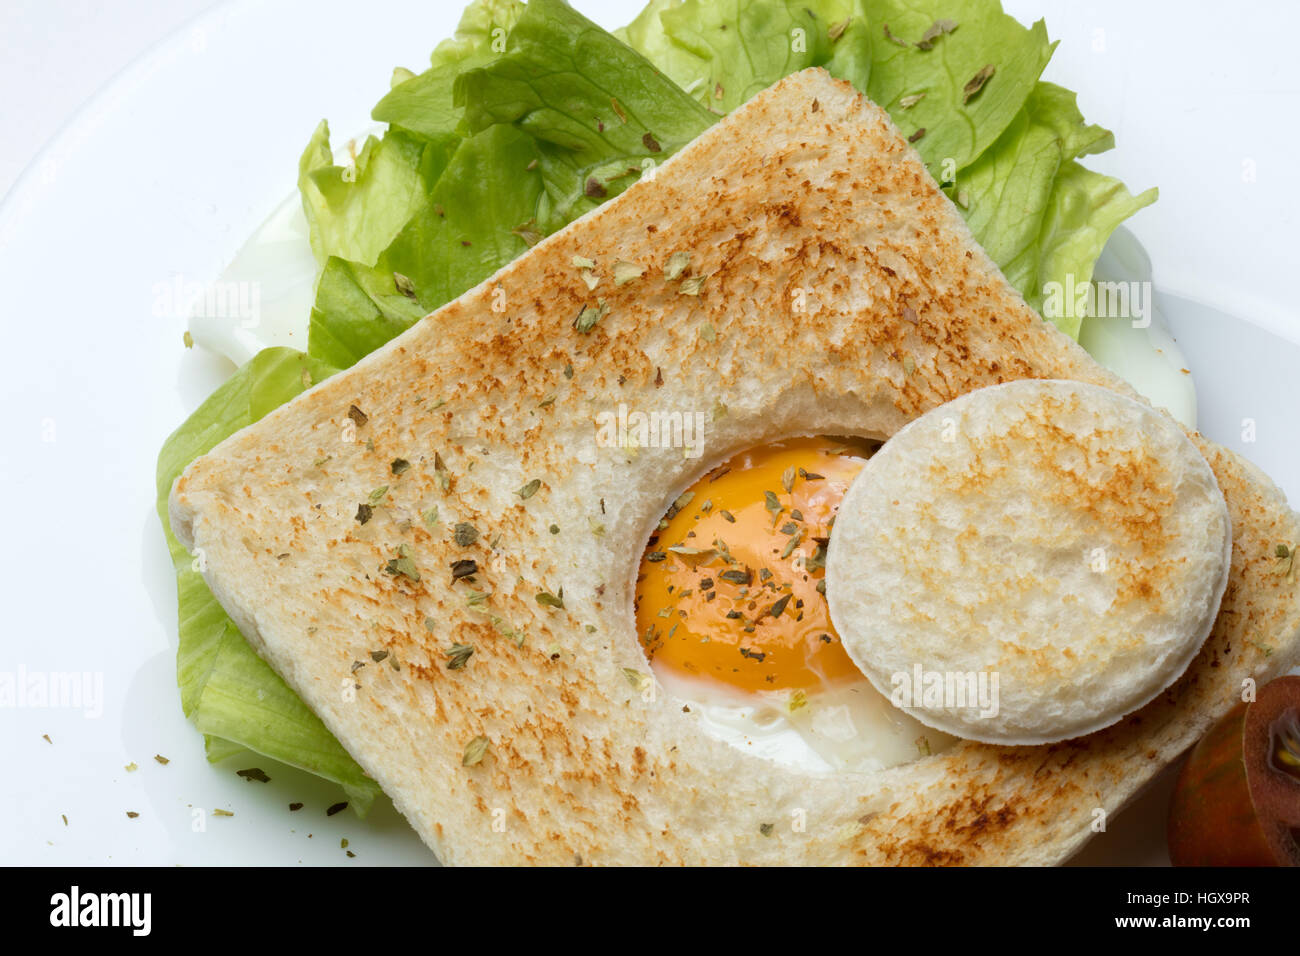 egg sandwich with lettuce and tomato in a beautiful food style Stock Photo